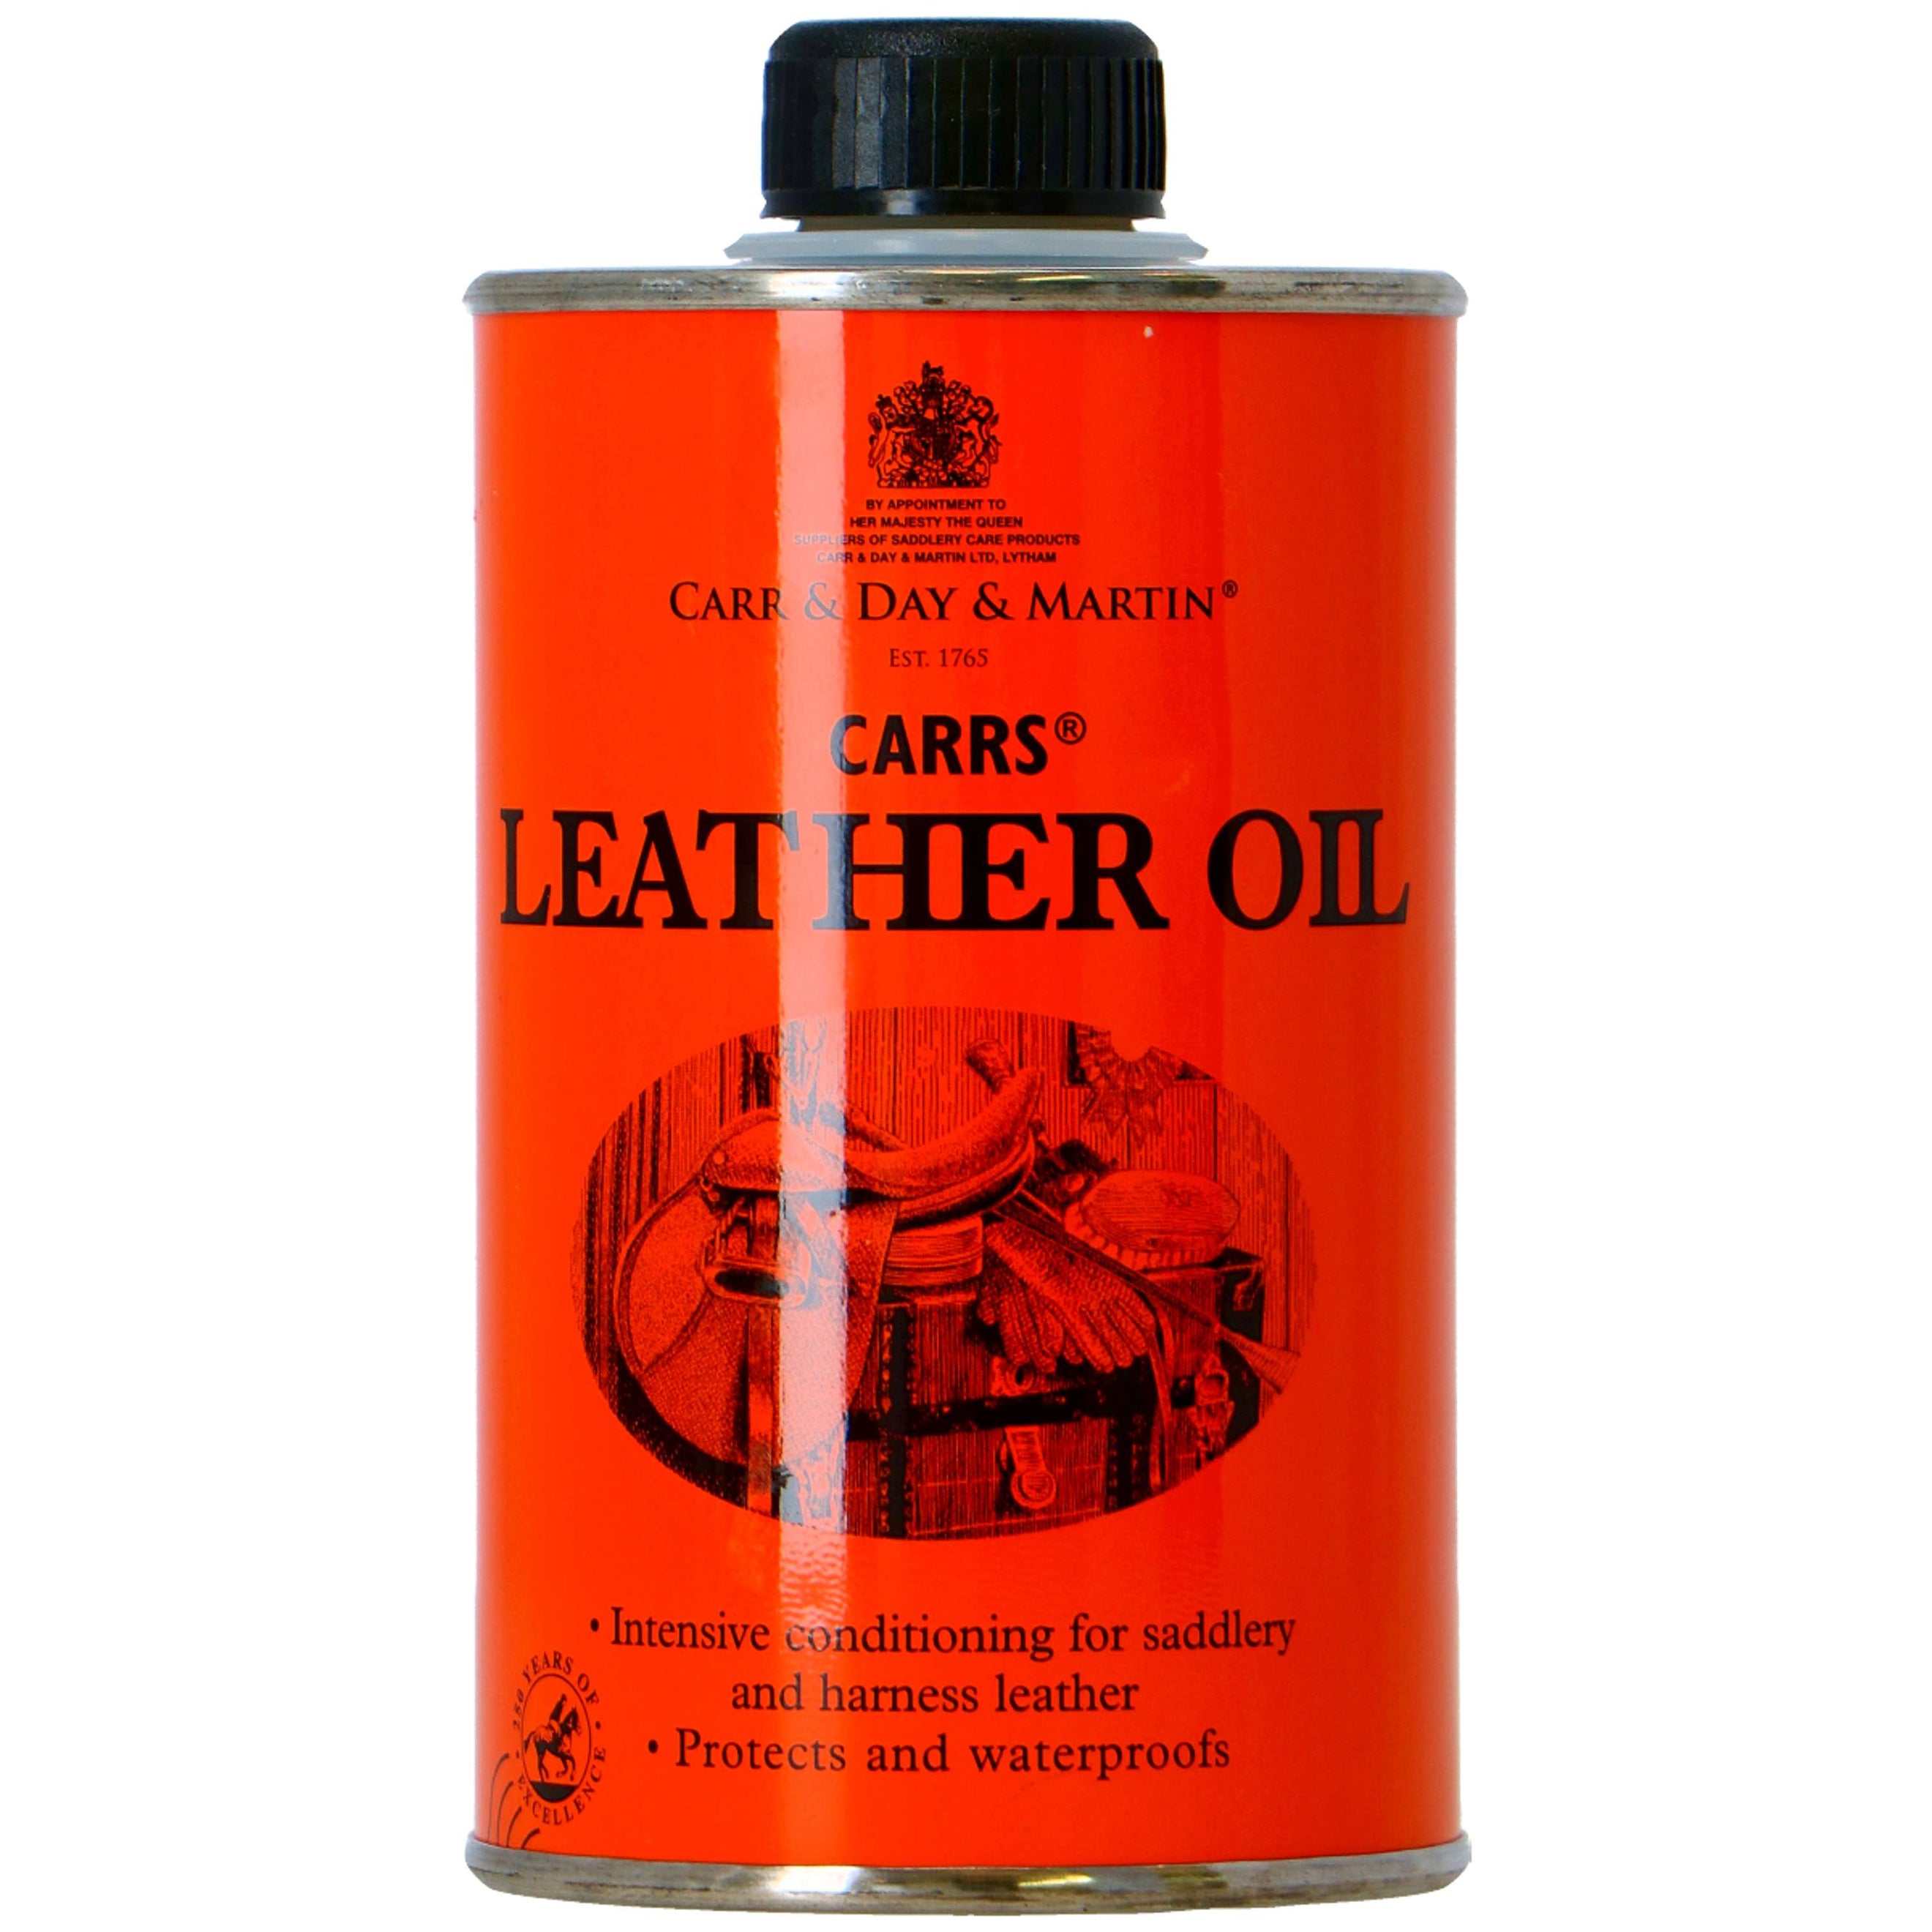 Carr & Day & Martin Huile pour Cuir Carrs Leather Oil